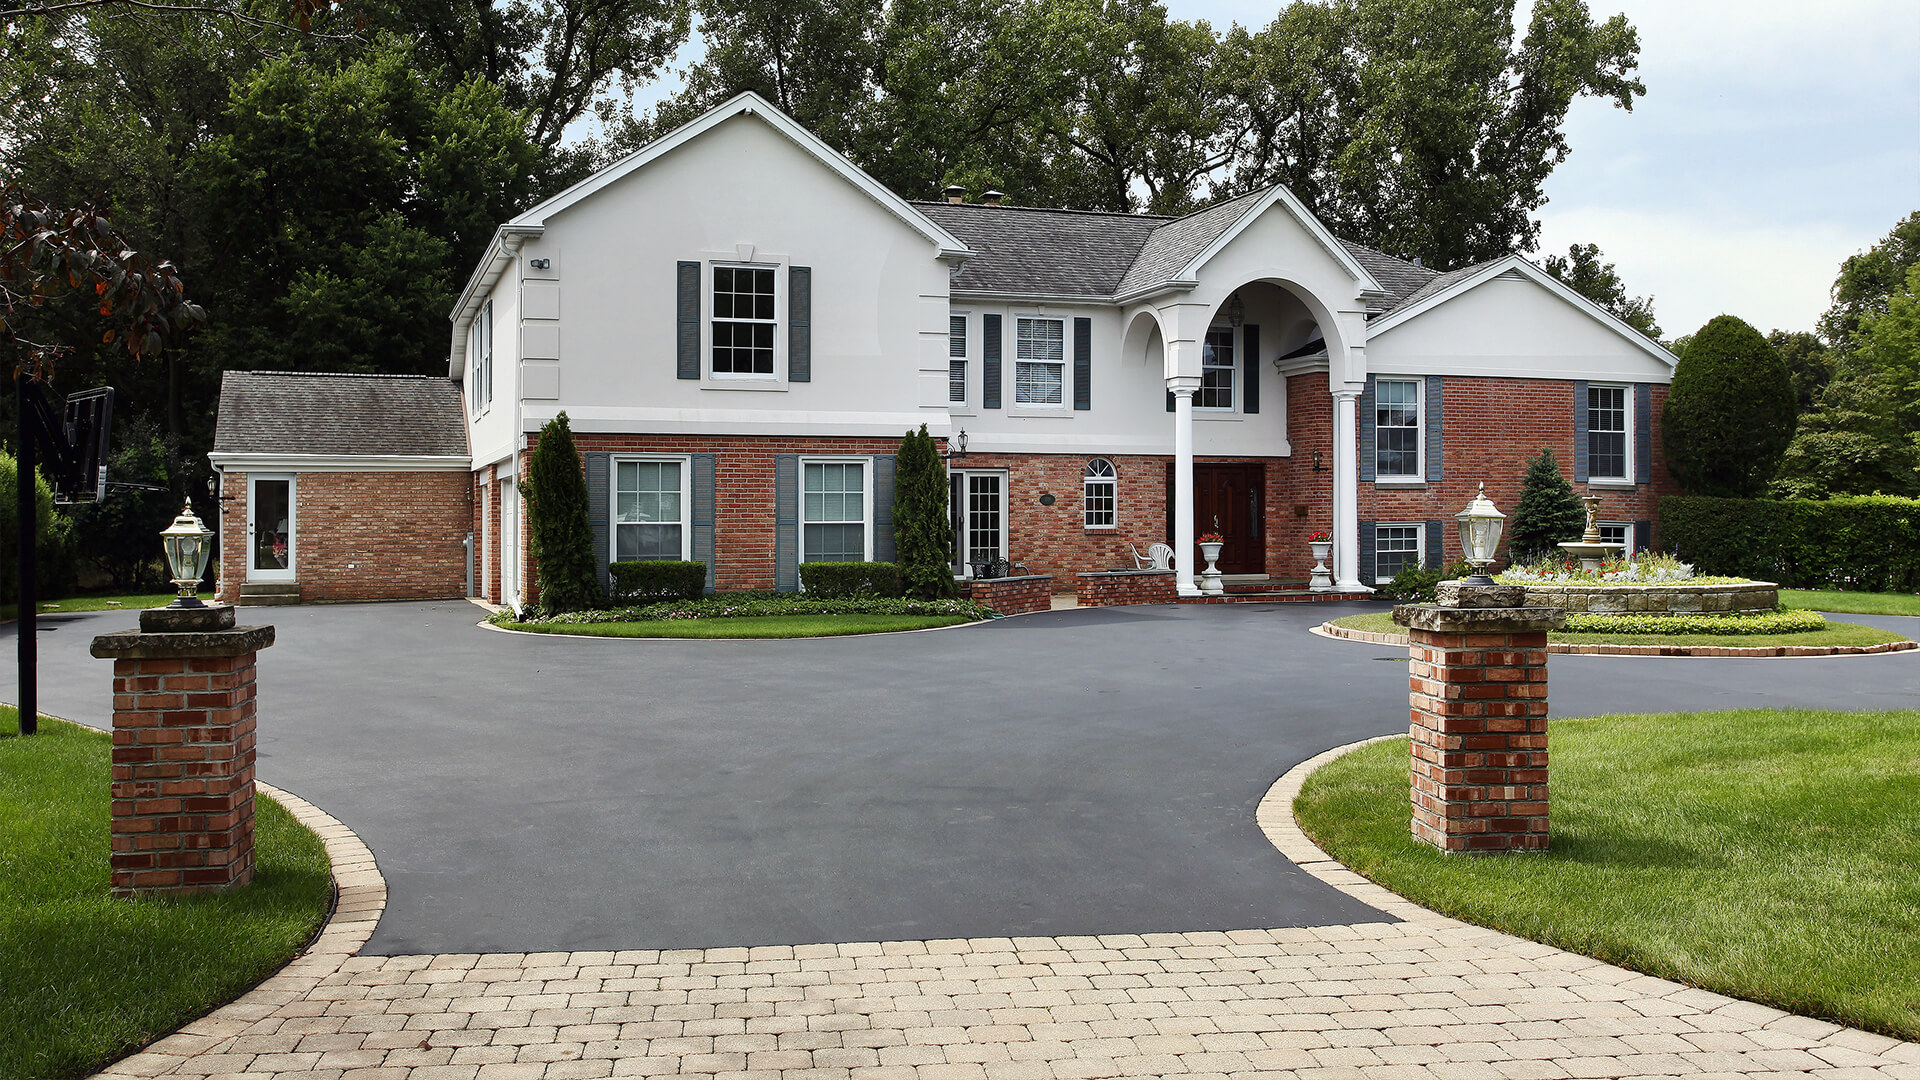 Concrete or Asphalt? Driveway To Choose For Your Home